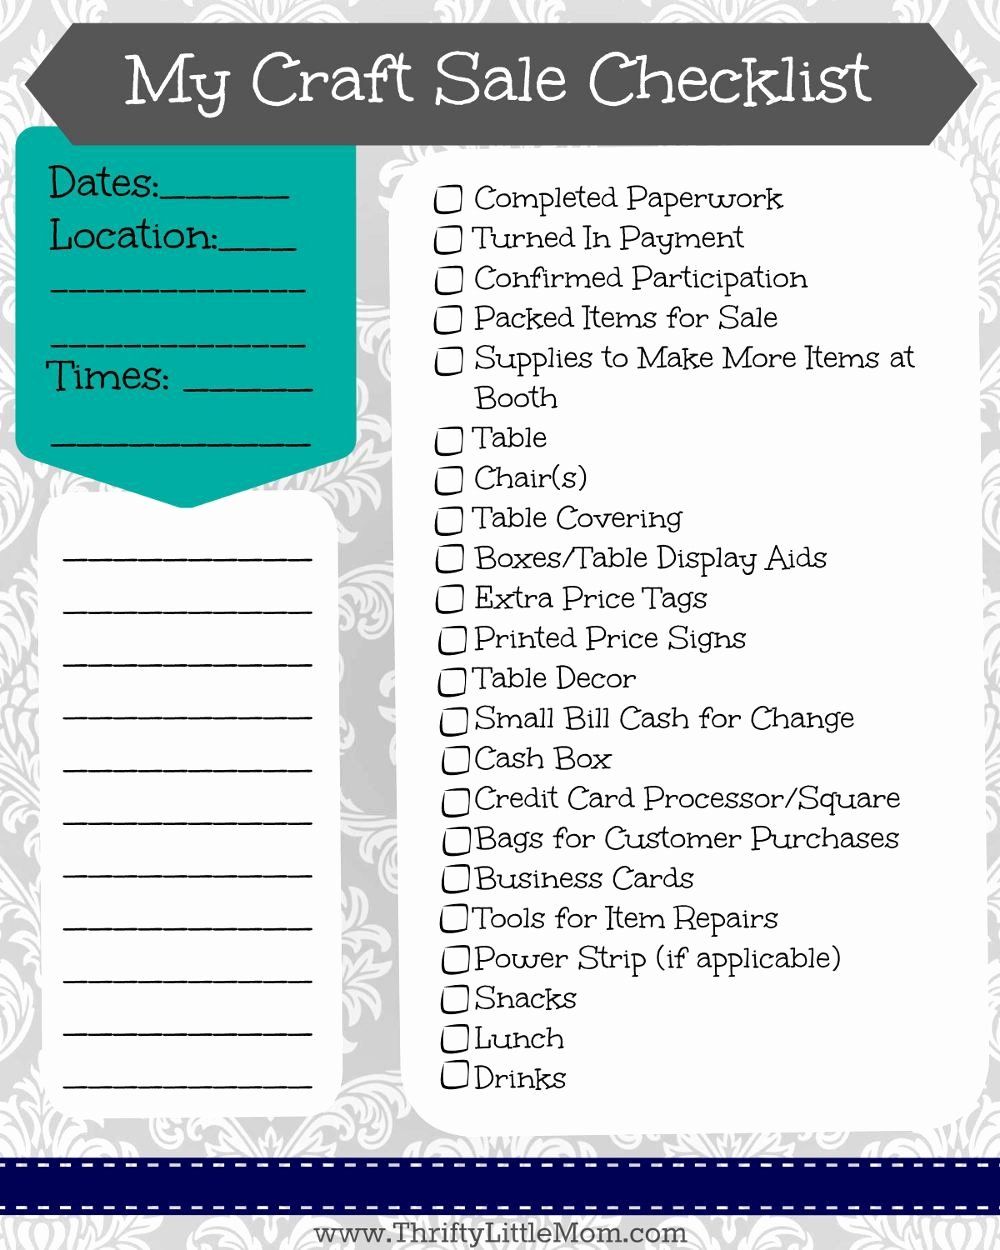 Craft Fair Vendor Application Template New Free Printable Craft Sale Checklist Easy Diy Craft Projects